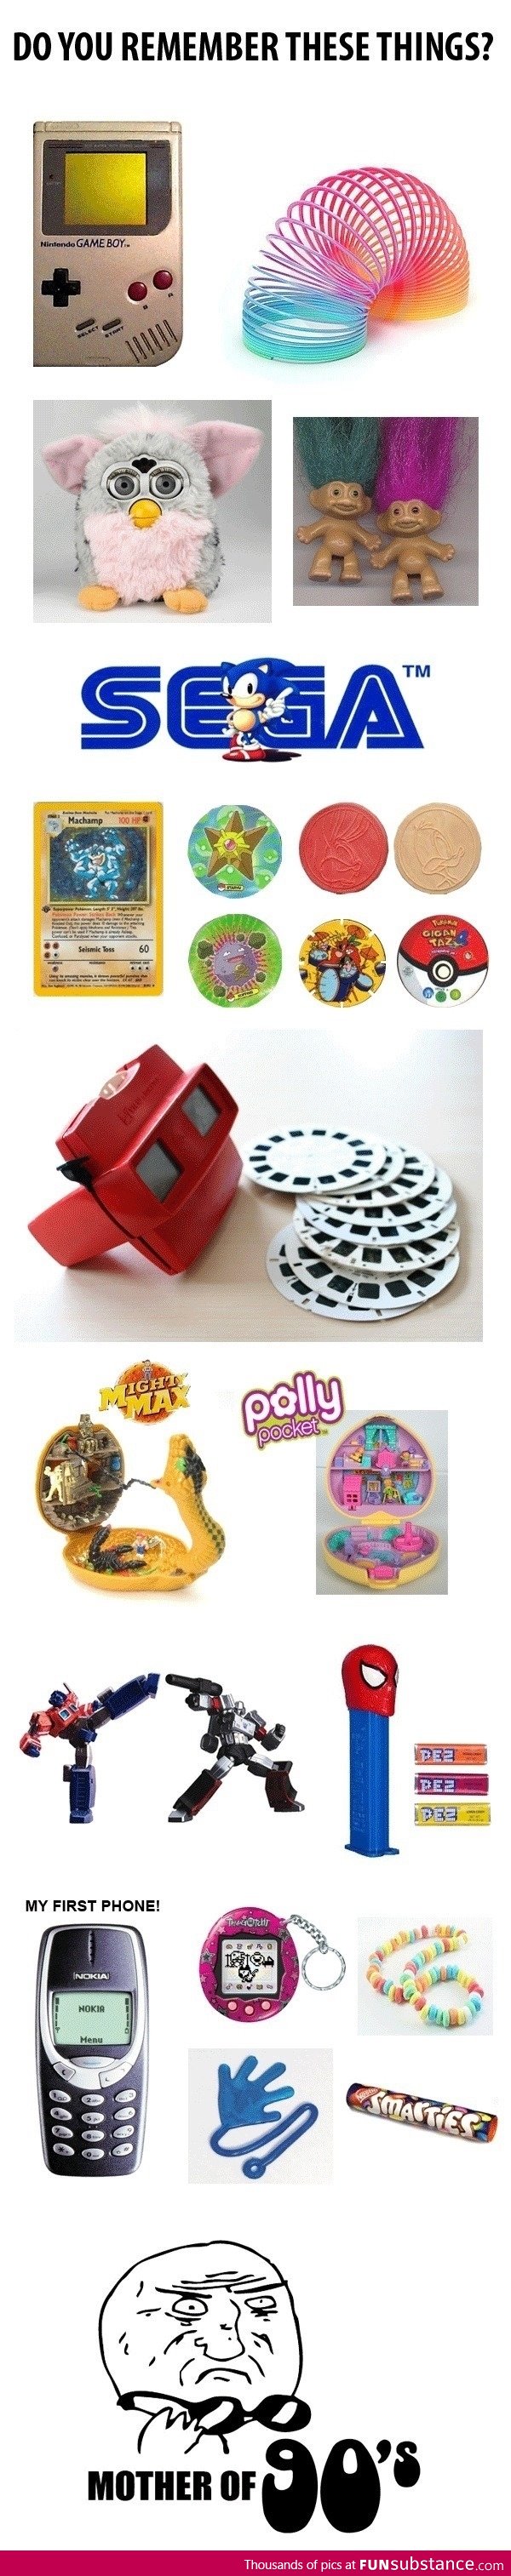 Do you remember these things?